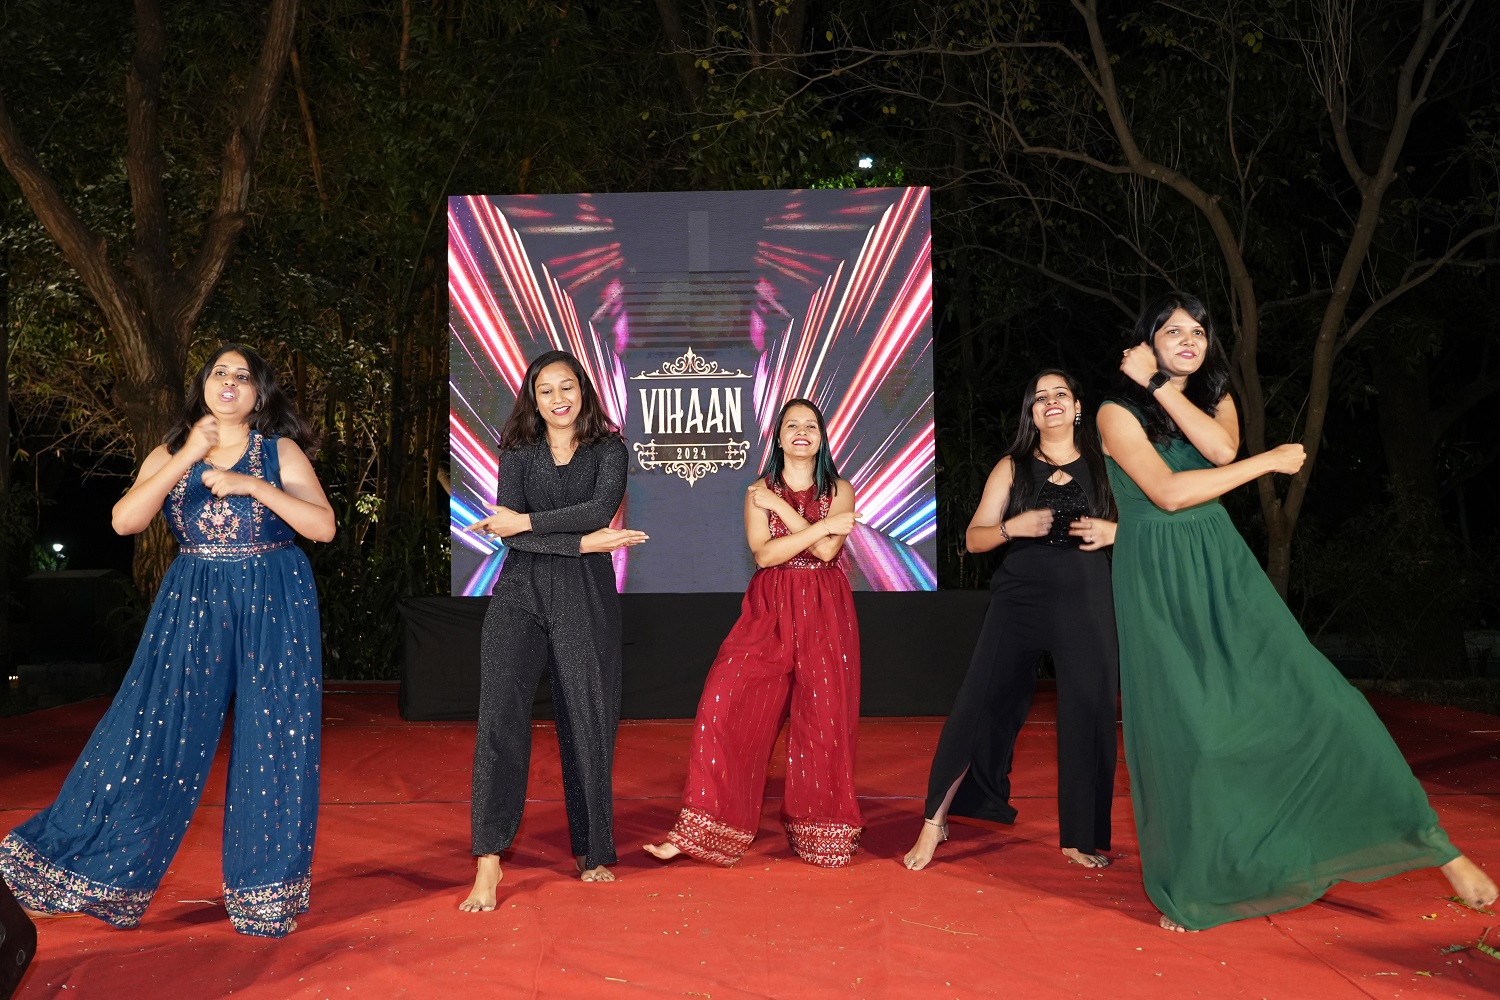 Spouses also showcased their talents at Vihaan '24.